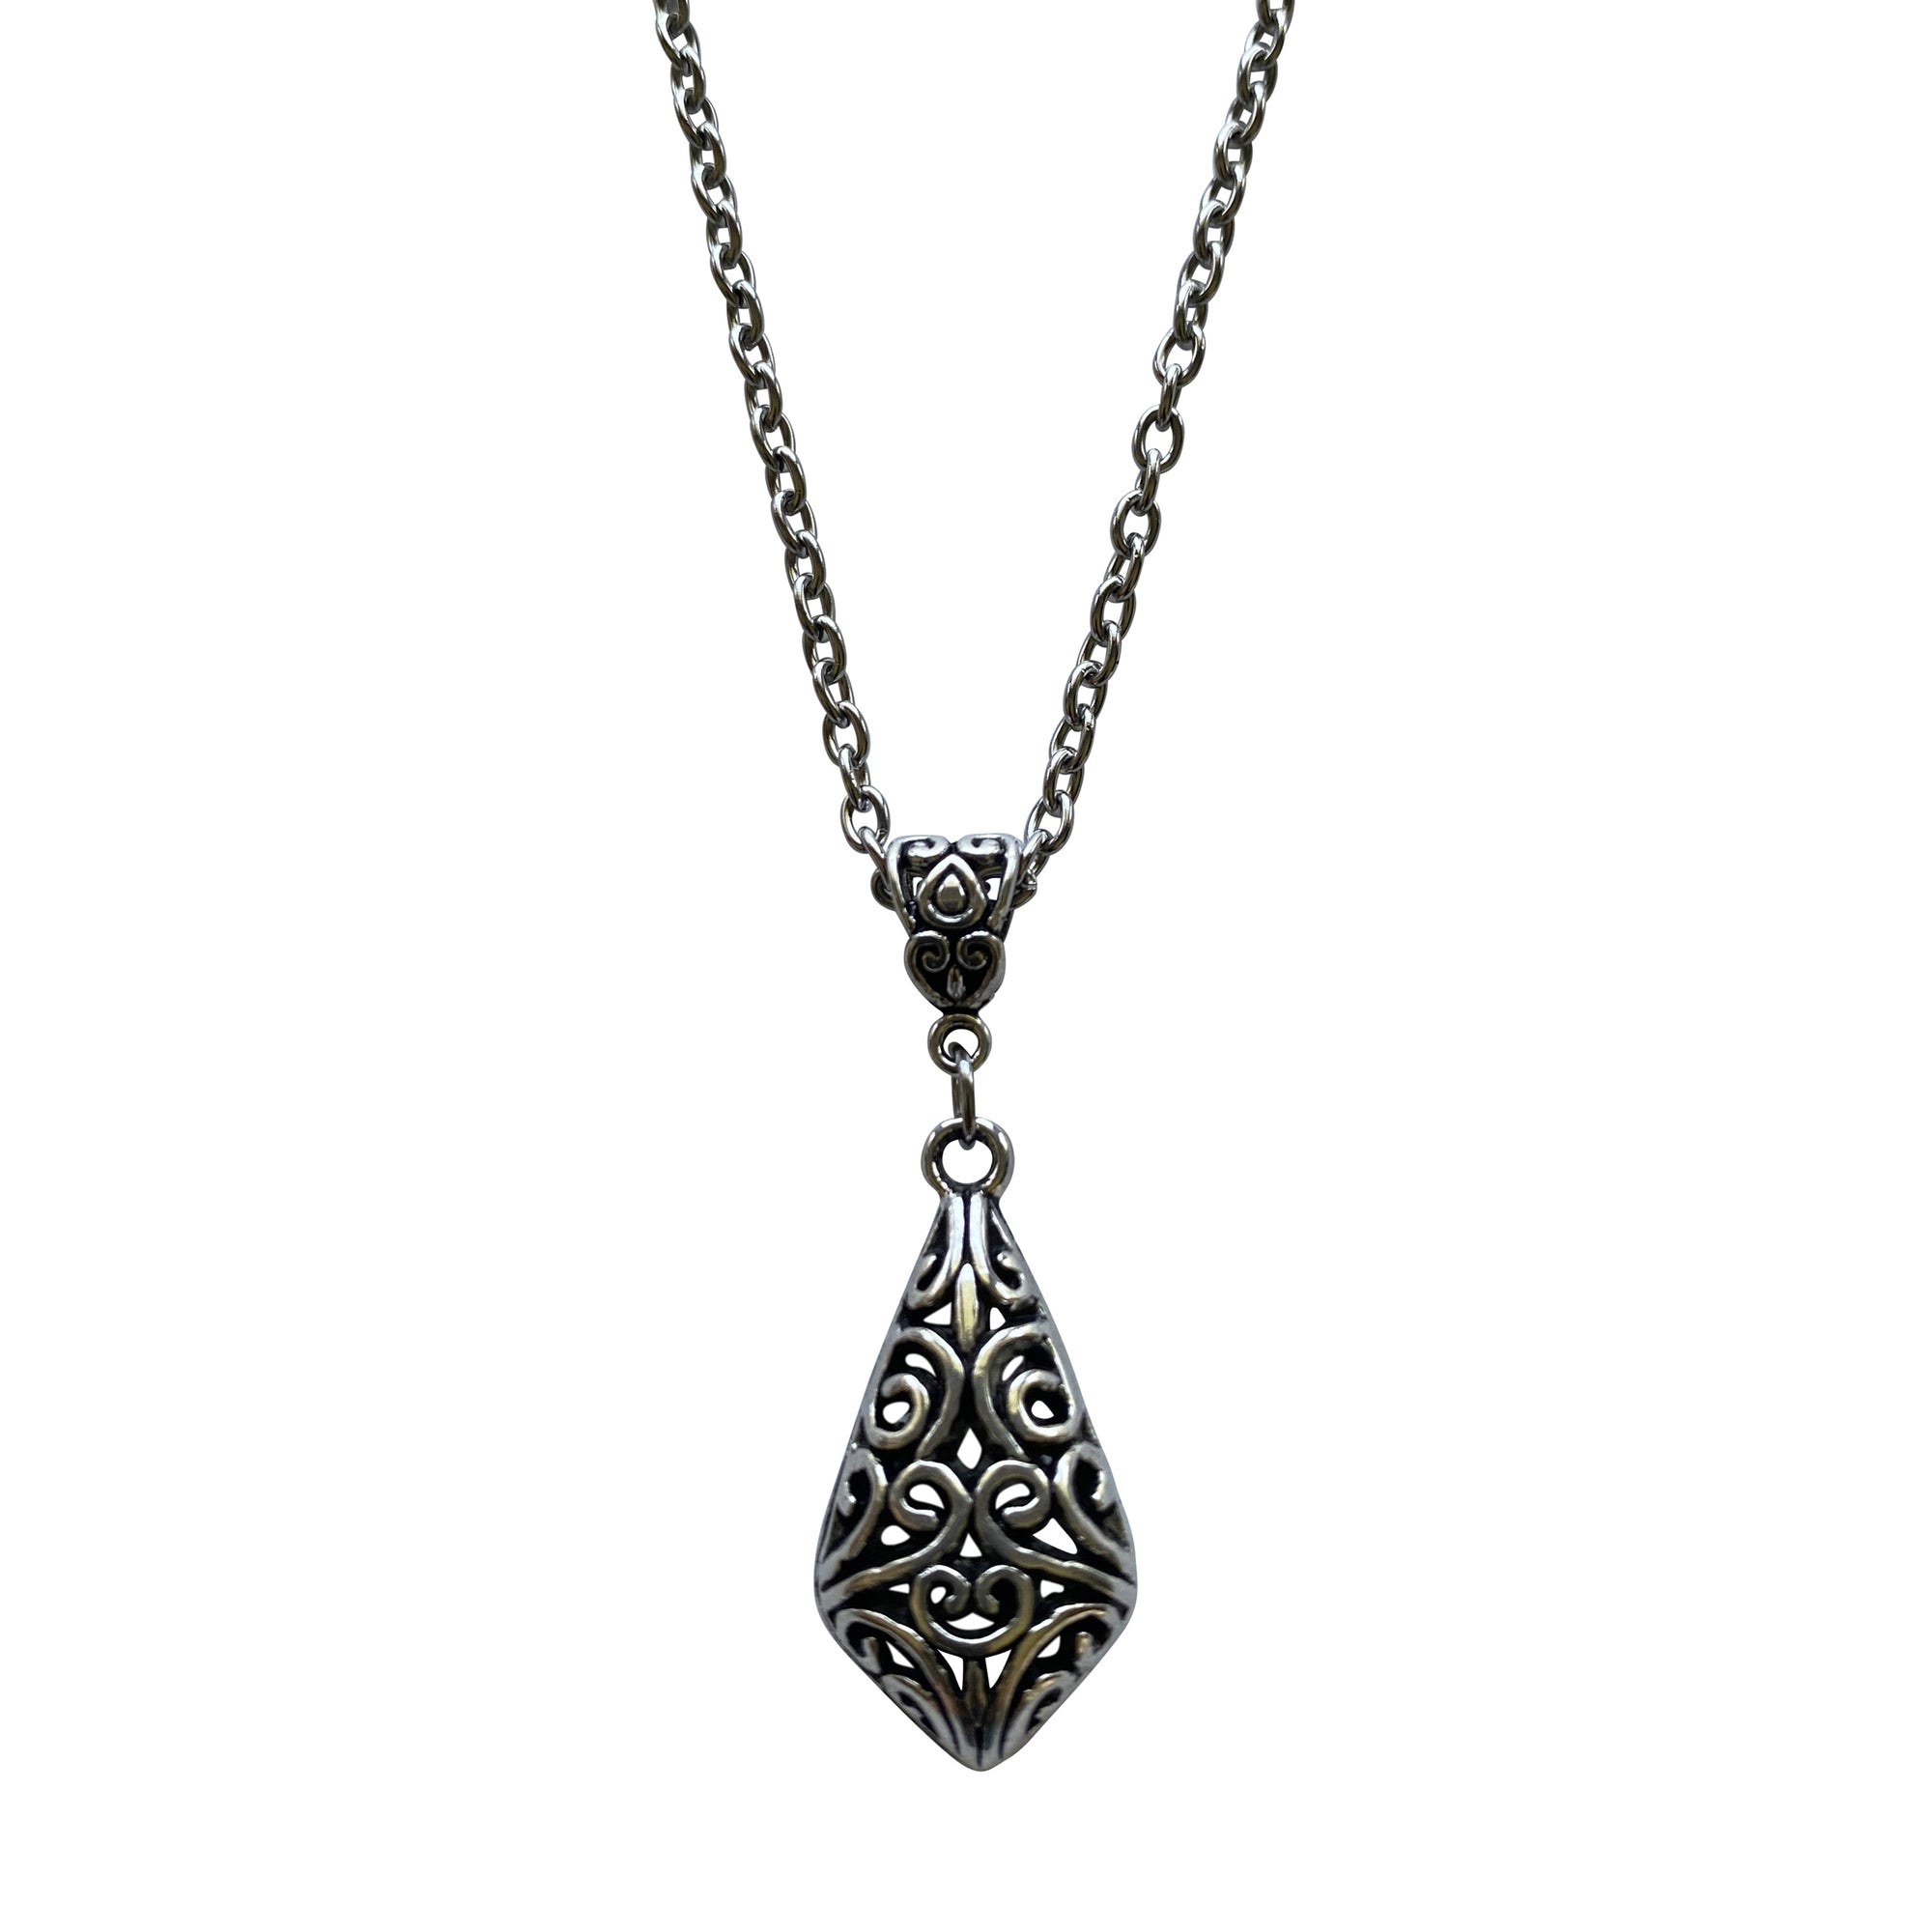 Pewter Filigree Pendant Necklace with Stainless Steel Chain